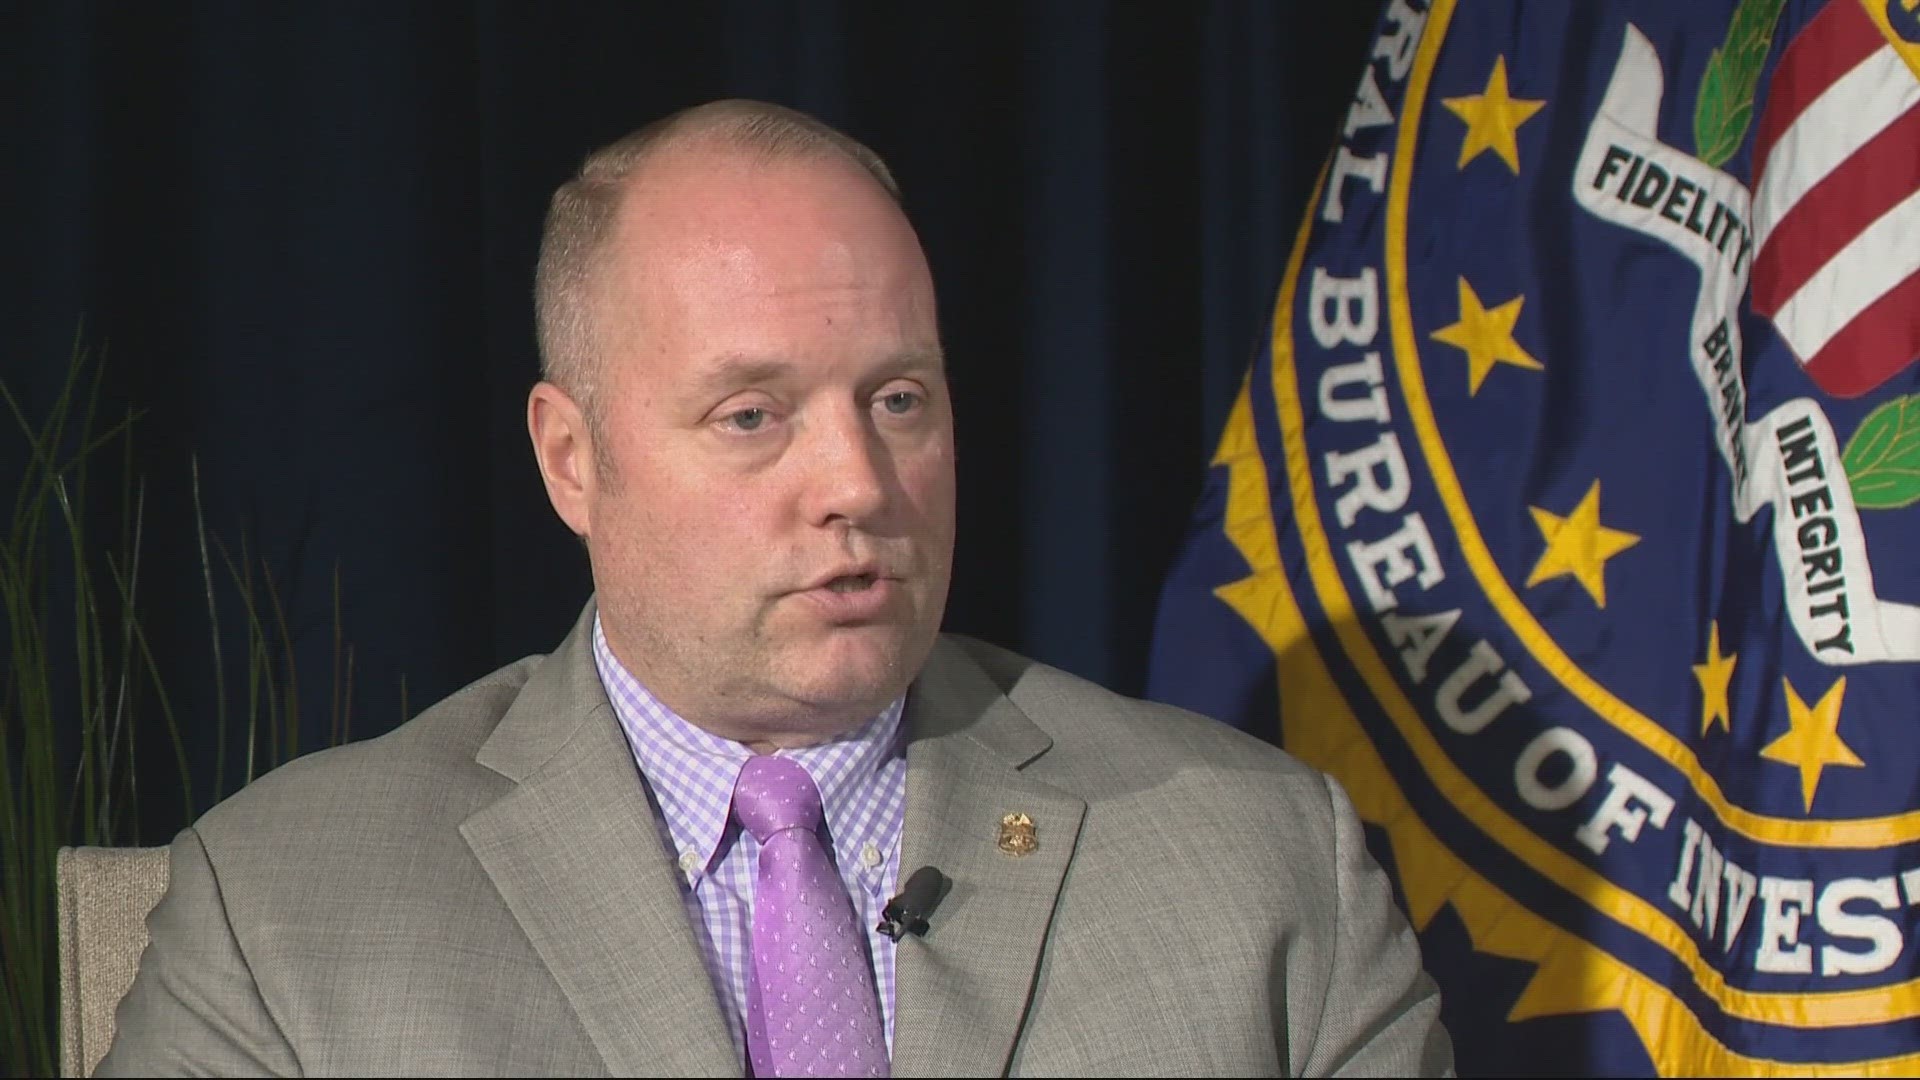 Special Agent in Charge Kieran Ramsey said they're still piecing together the threats to see if they're connected.